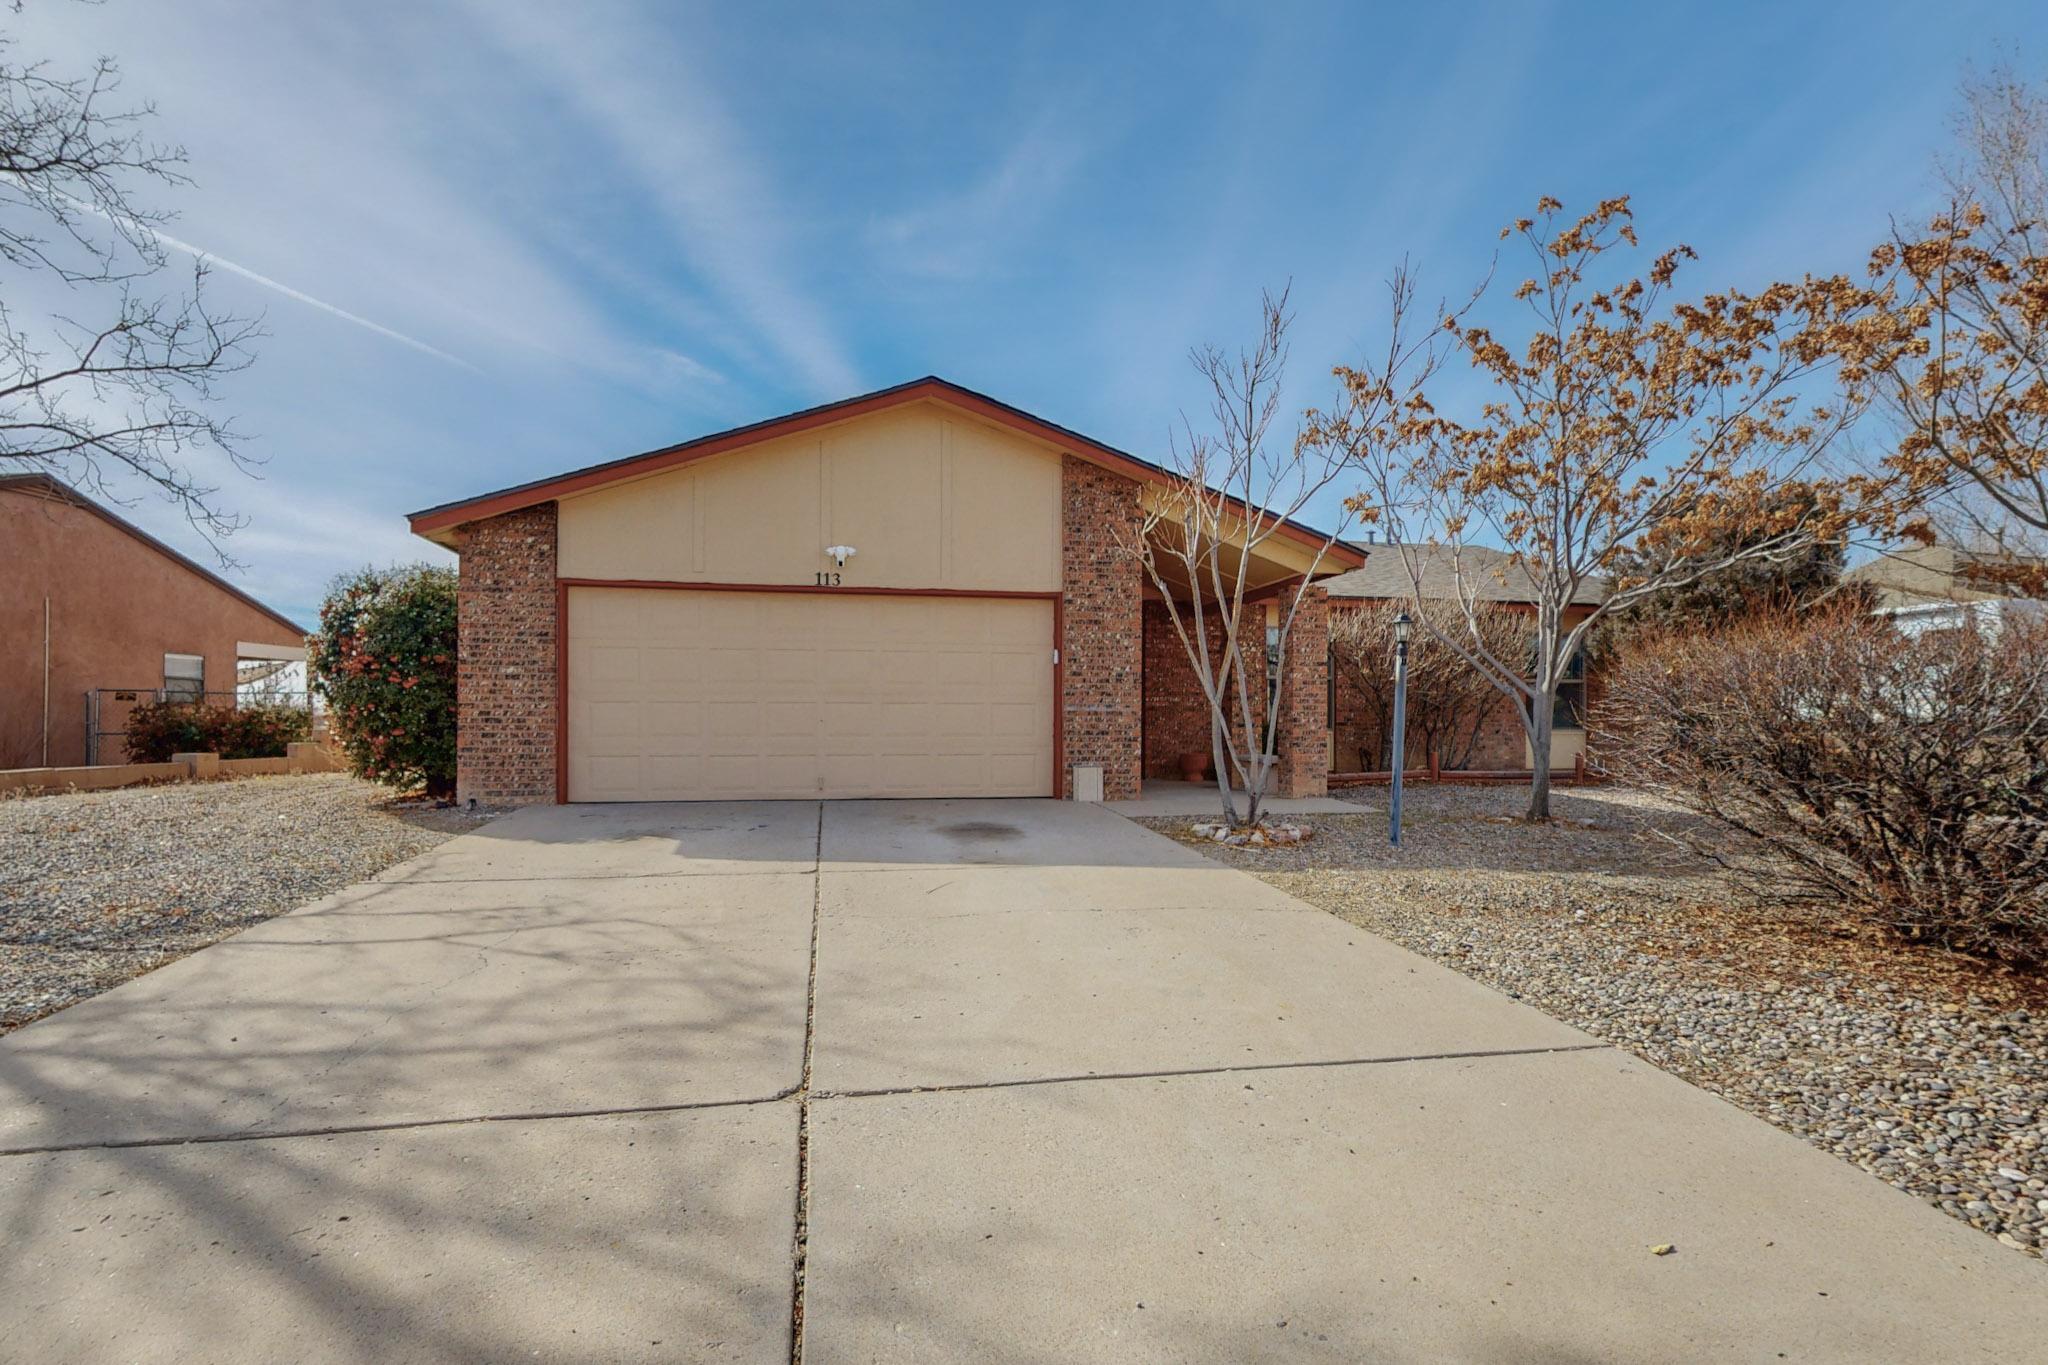 Welcome home!This home is boasting at over 1600 square feet with open floor plans, stainless steel appliances, fresh paint, AC unit, new water heater, newer furnace and updated roof in 2022. Located in the heart of Rio Rancho, this house is ready for you to call home. Come by and see it today!